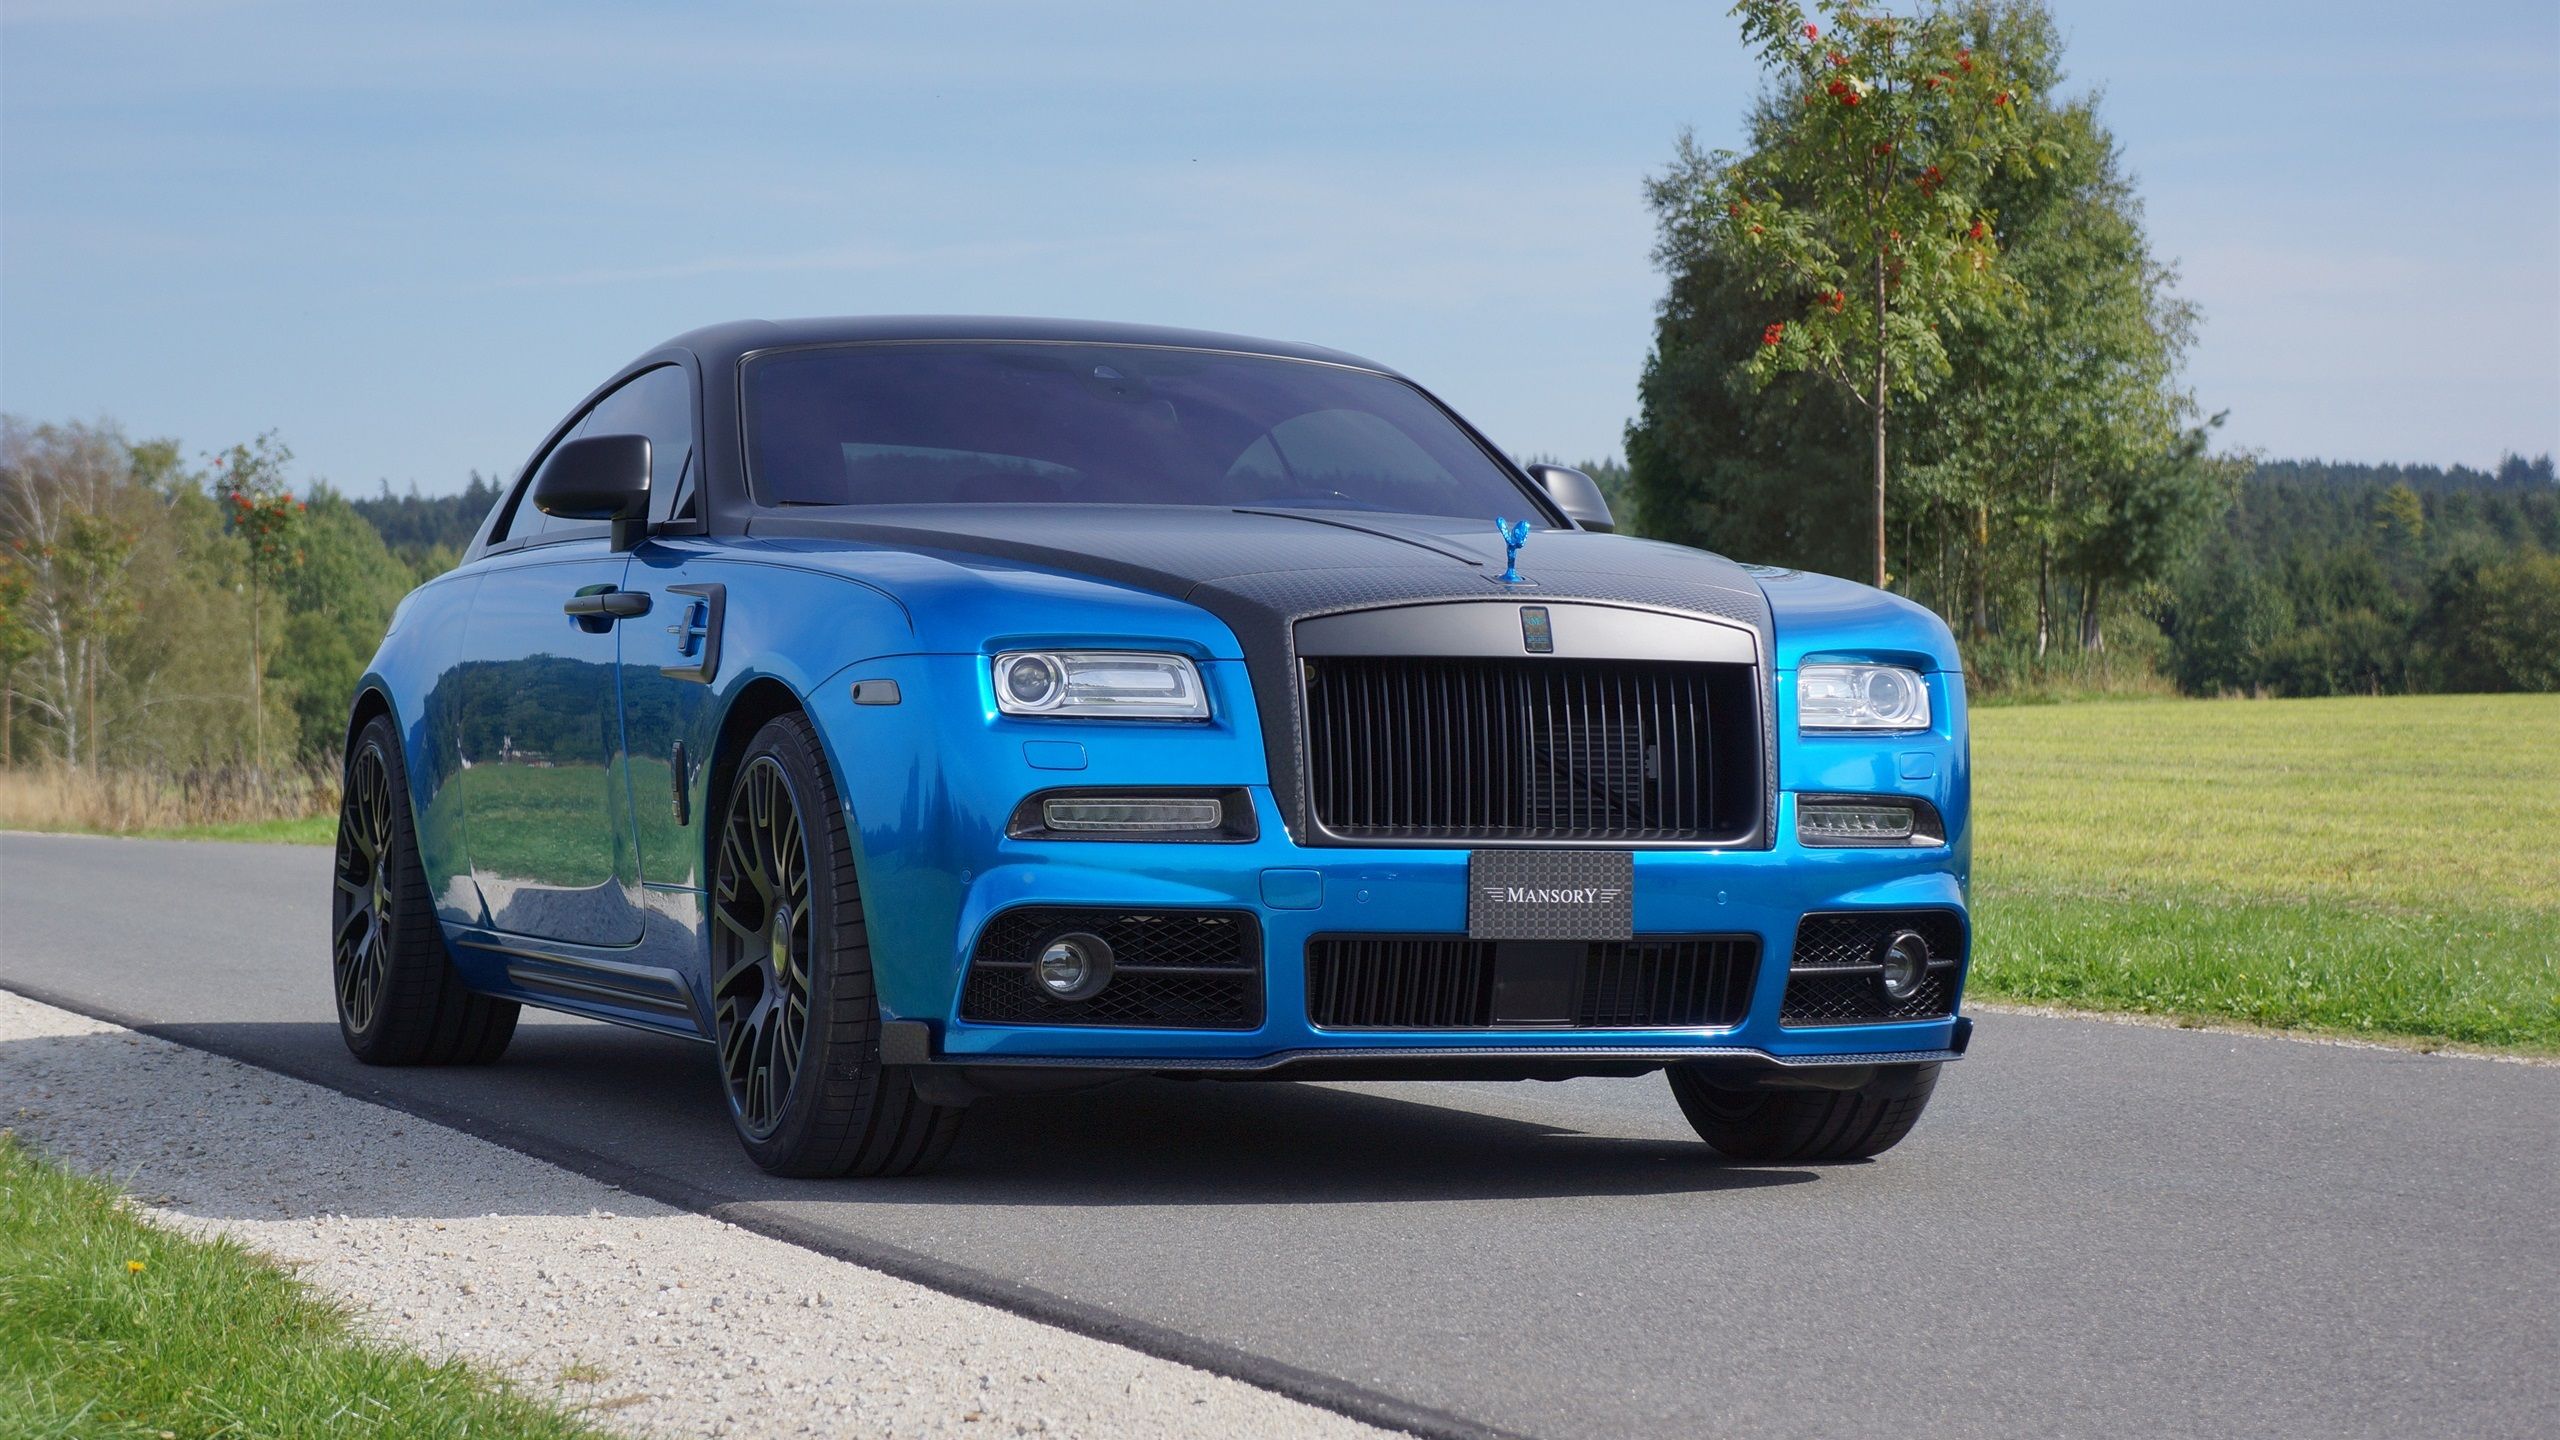 Mansory Rolls Royce Wraith Blue Luxury Car Front View